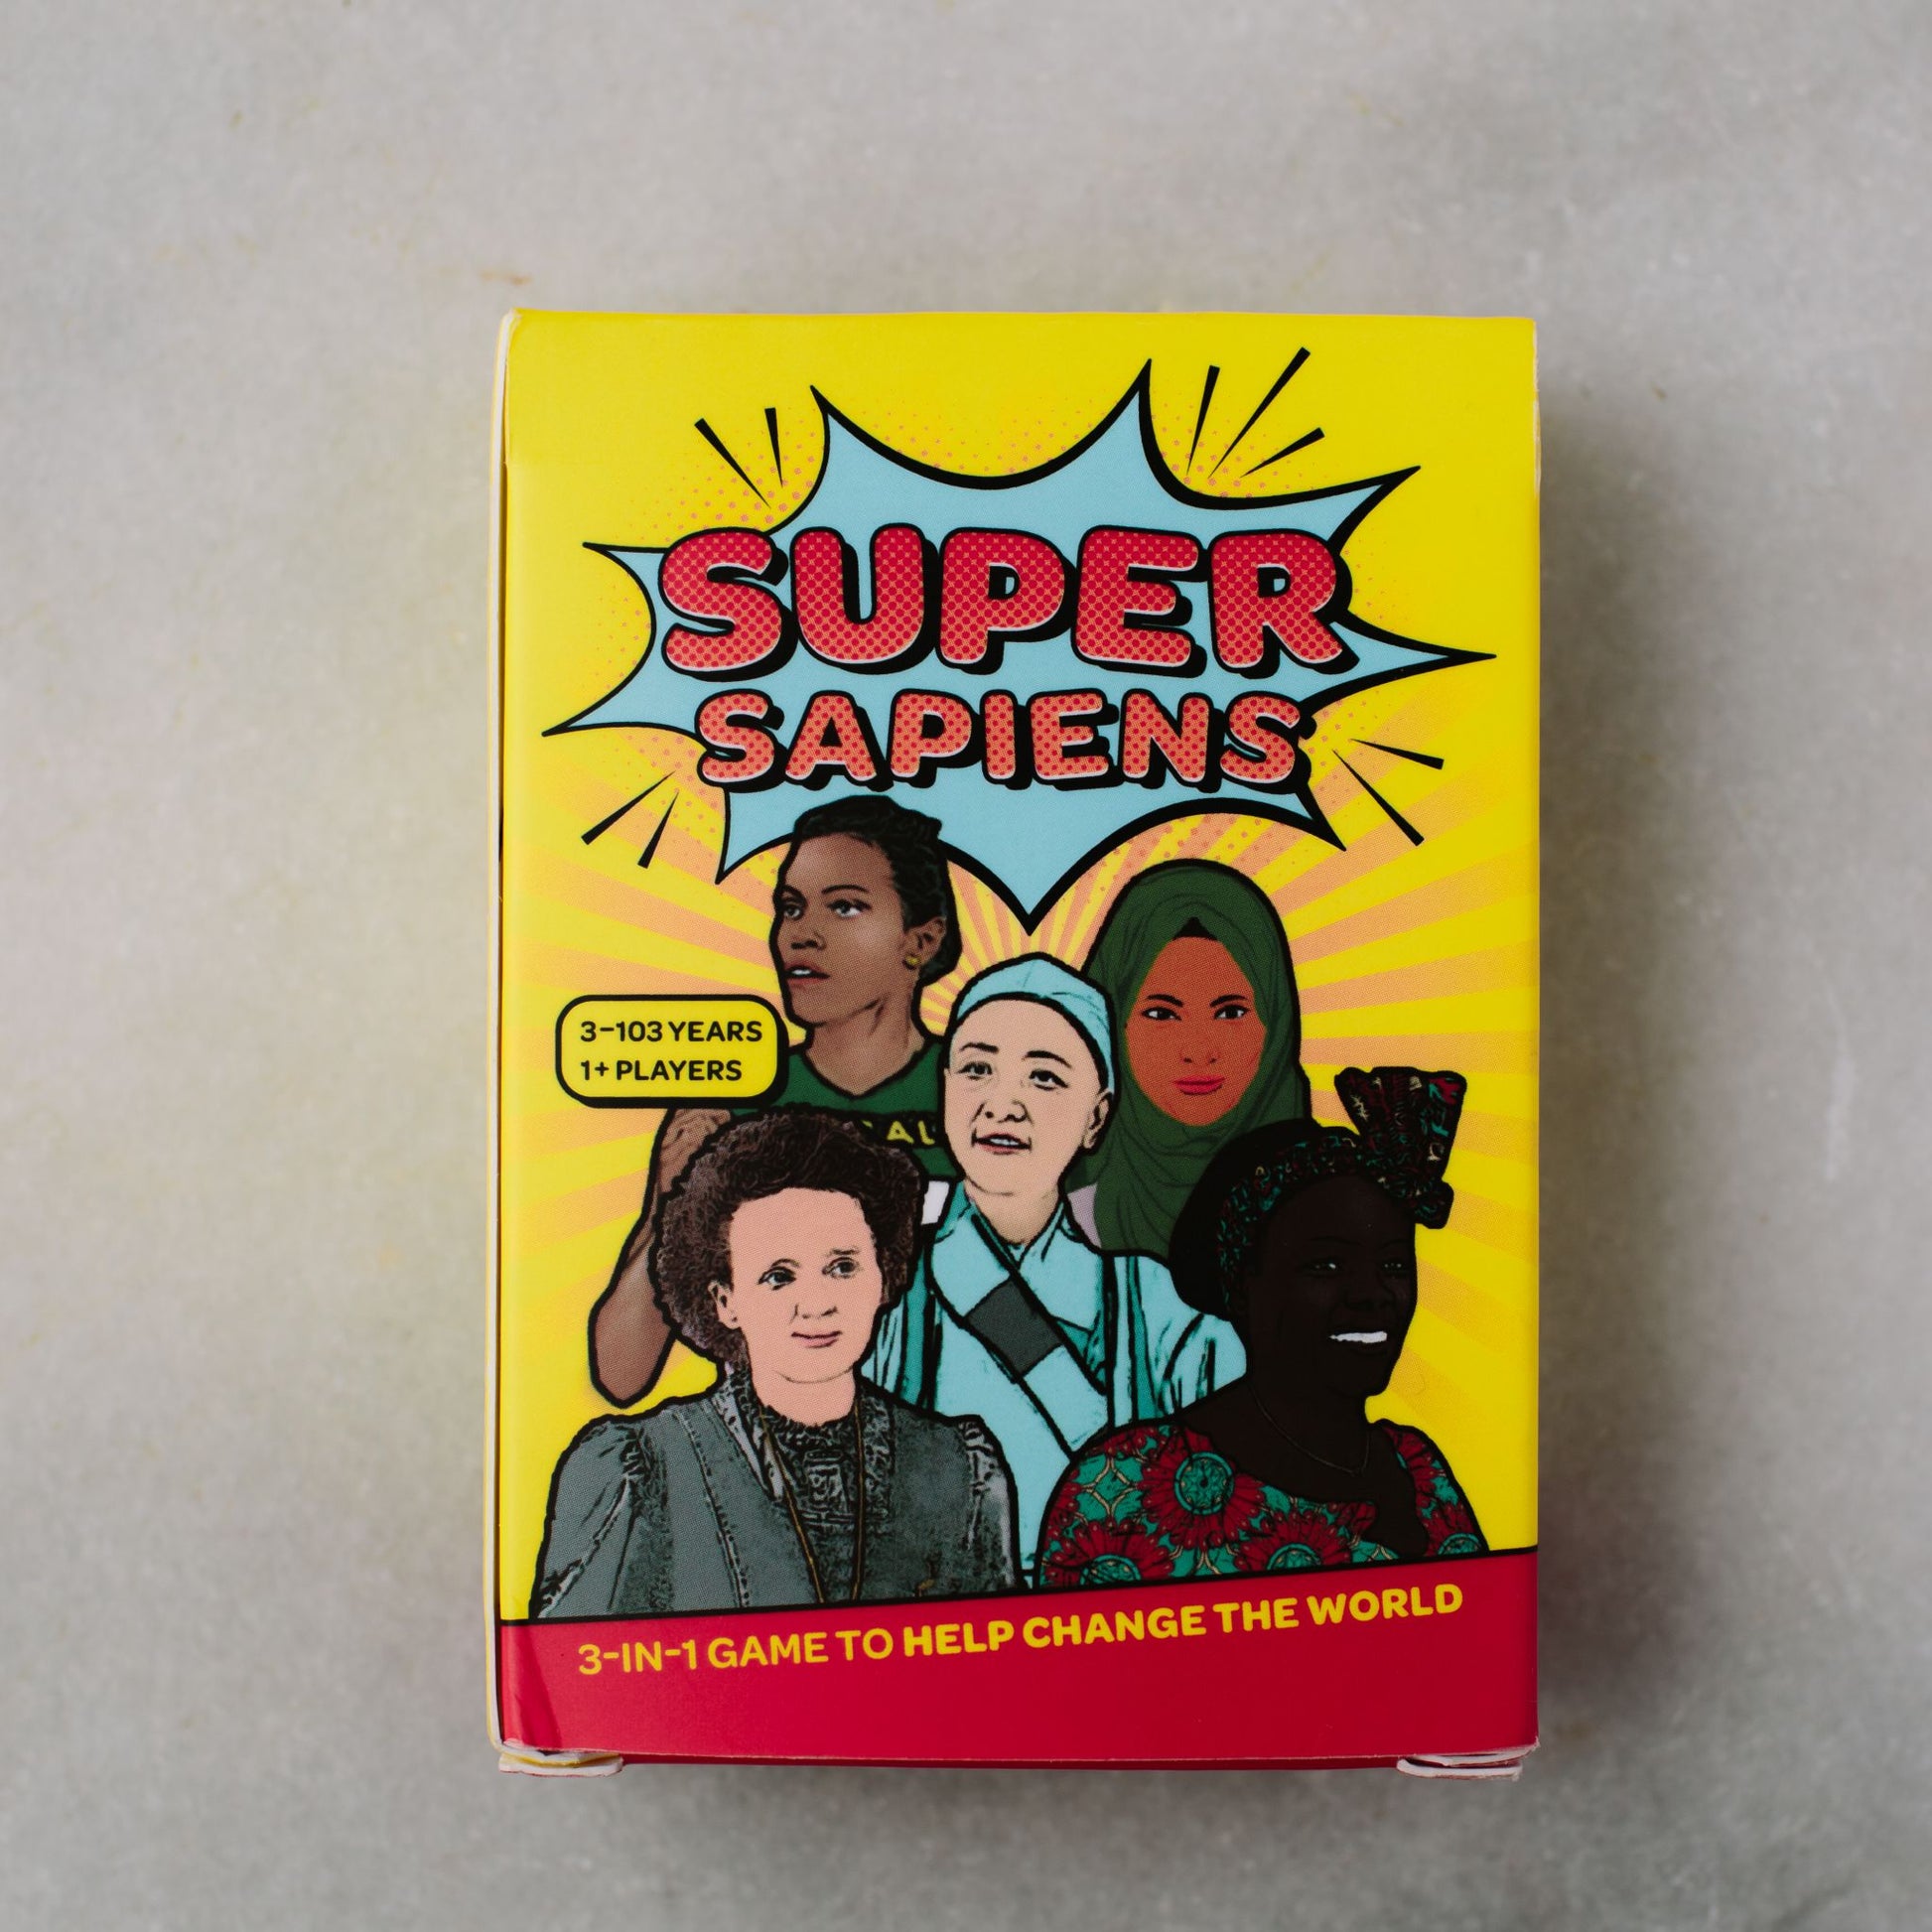 Super Sapiens  A 3-in-1 Game to Help Change the World - box